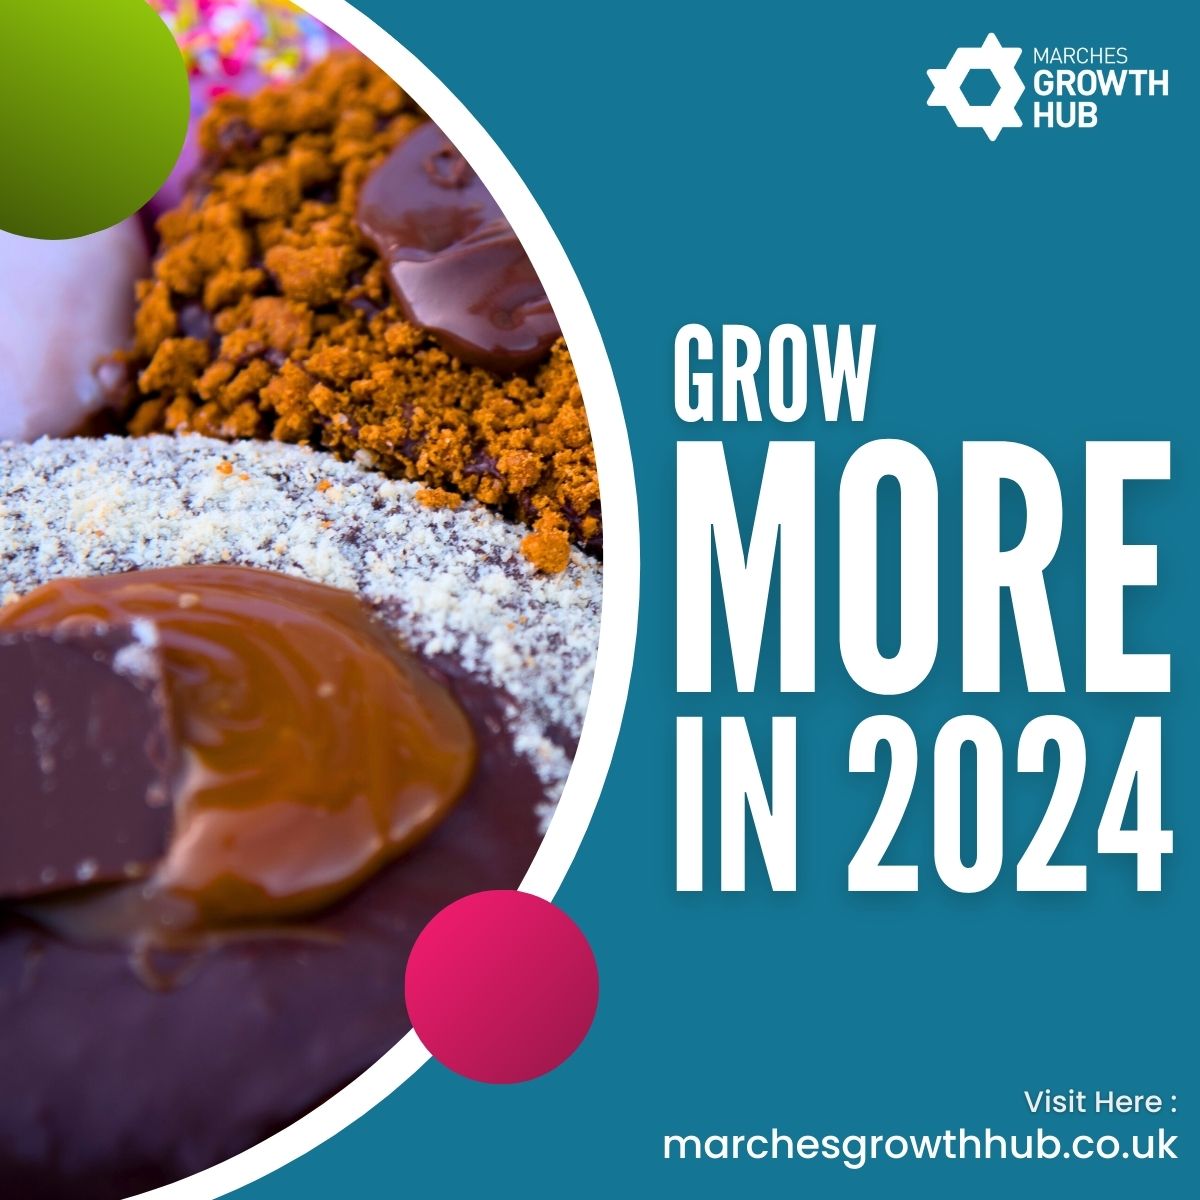 With help from the Marches Growth Hub Shropshire, @planet_doughnut has received tailored business support since its earliest days - benefitting from mentoring, workshops, grant funding and more - find out how we can help your business #GrowMoreIn2024 👉 bit.ly/3PsZsSU